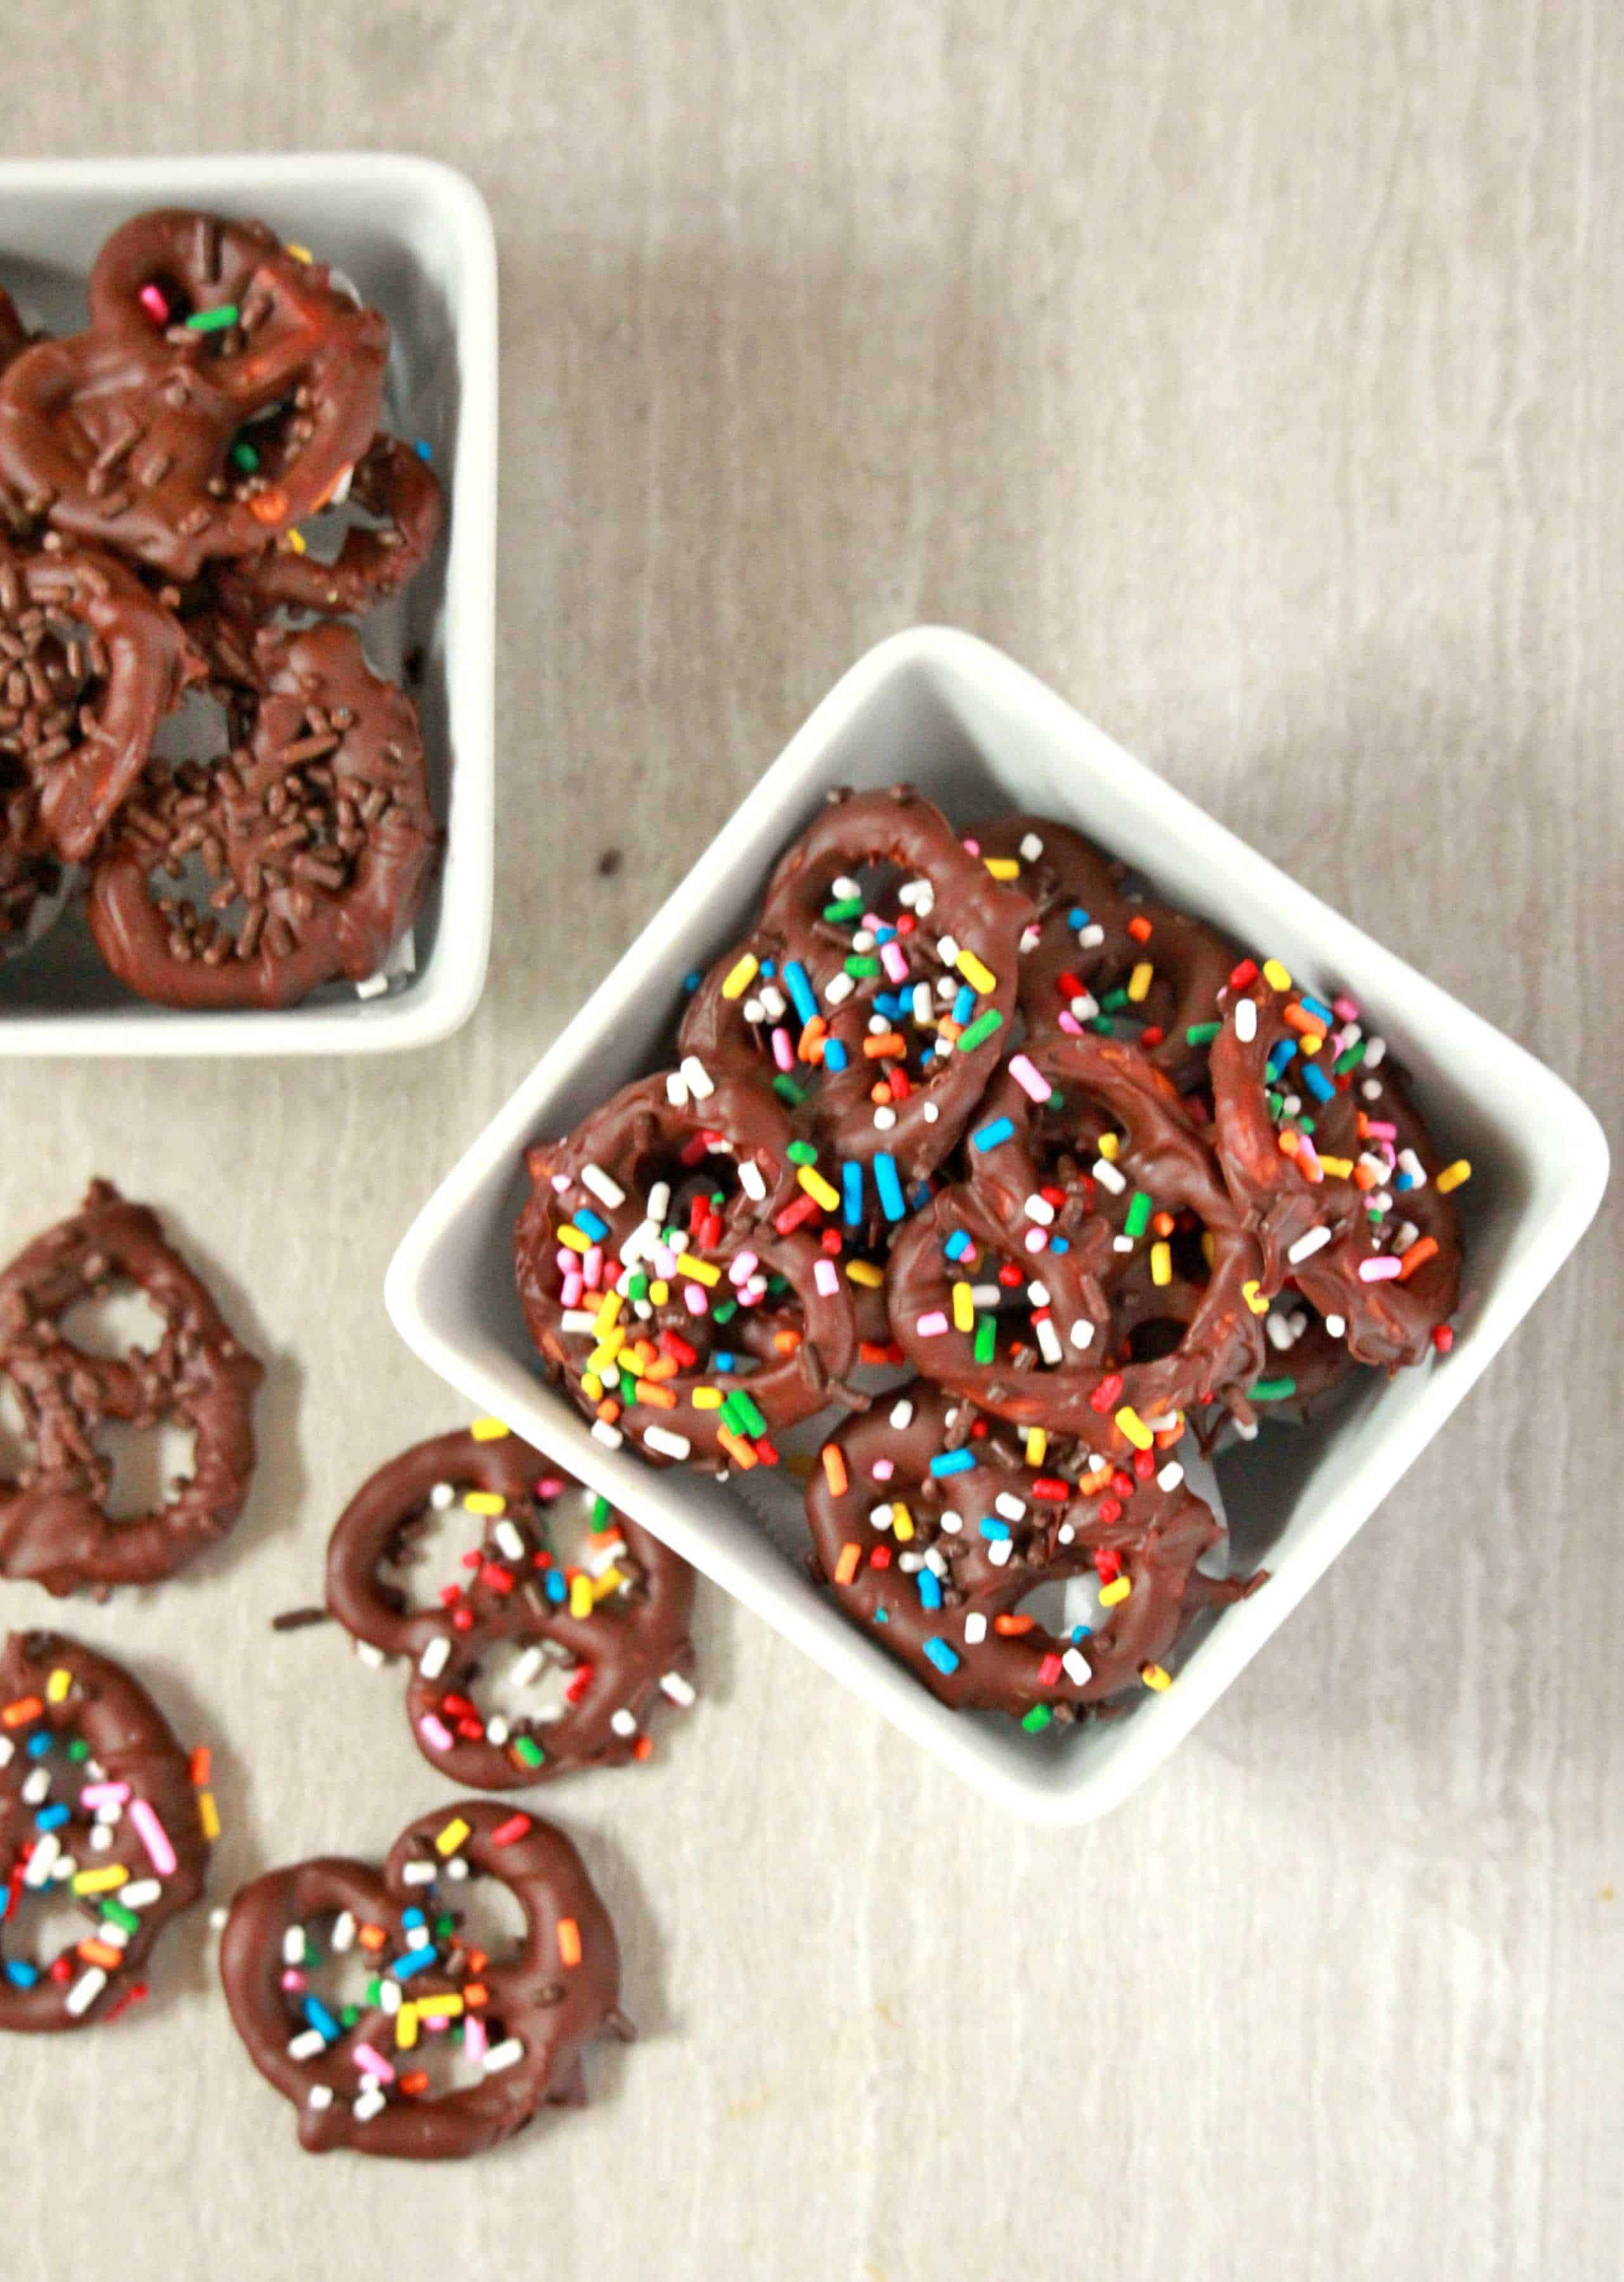 Chocolate Covered Pretzels with sprinkles